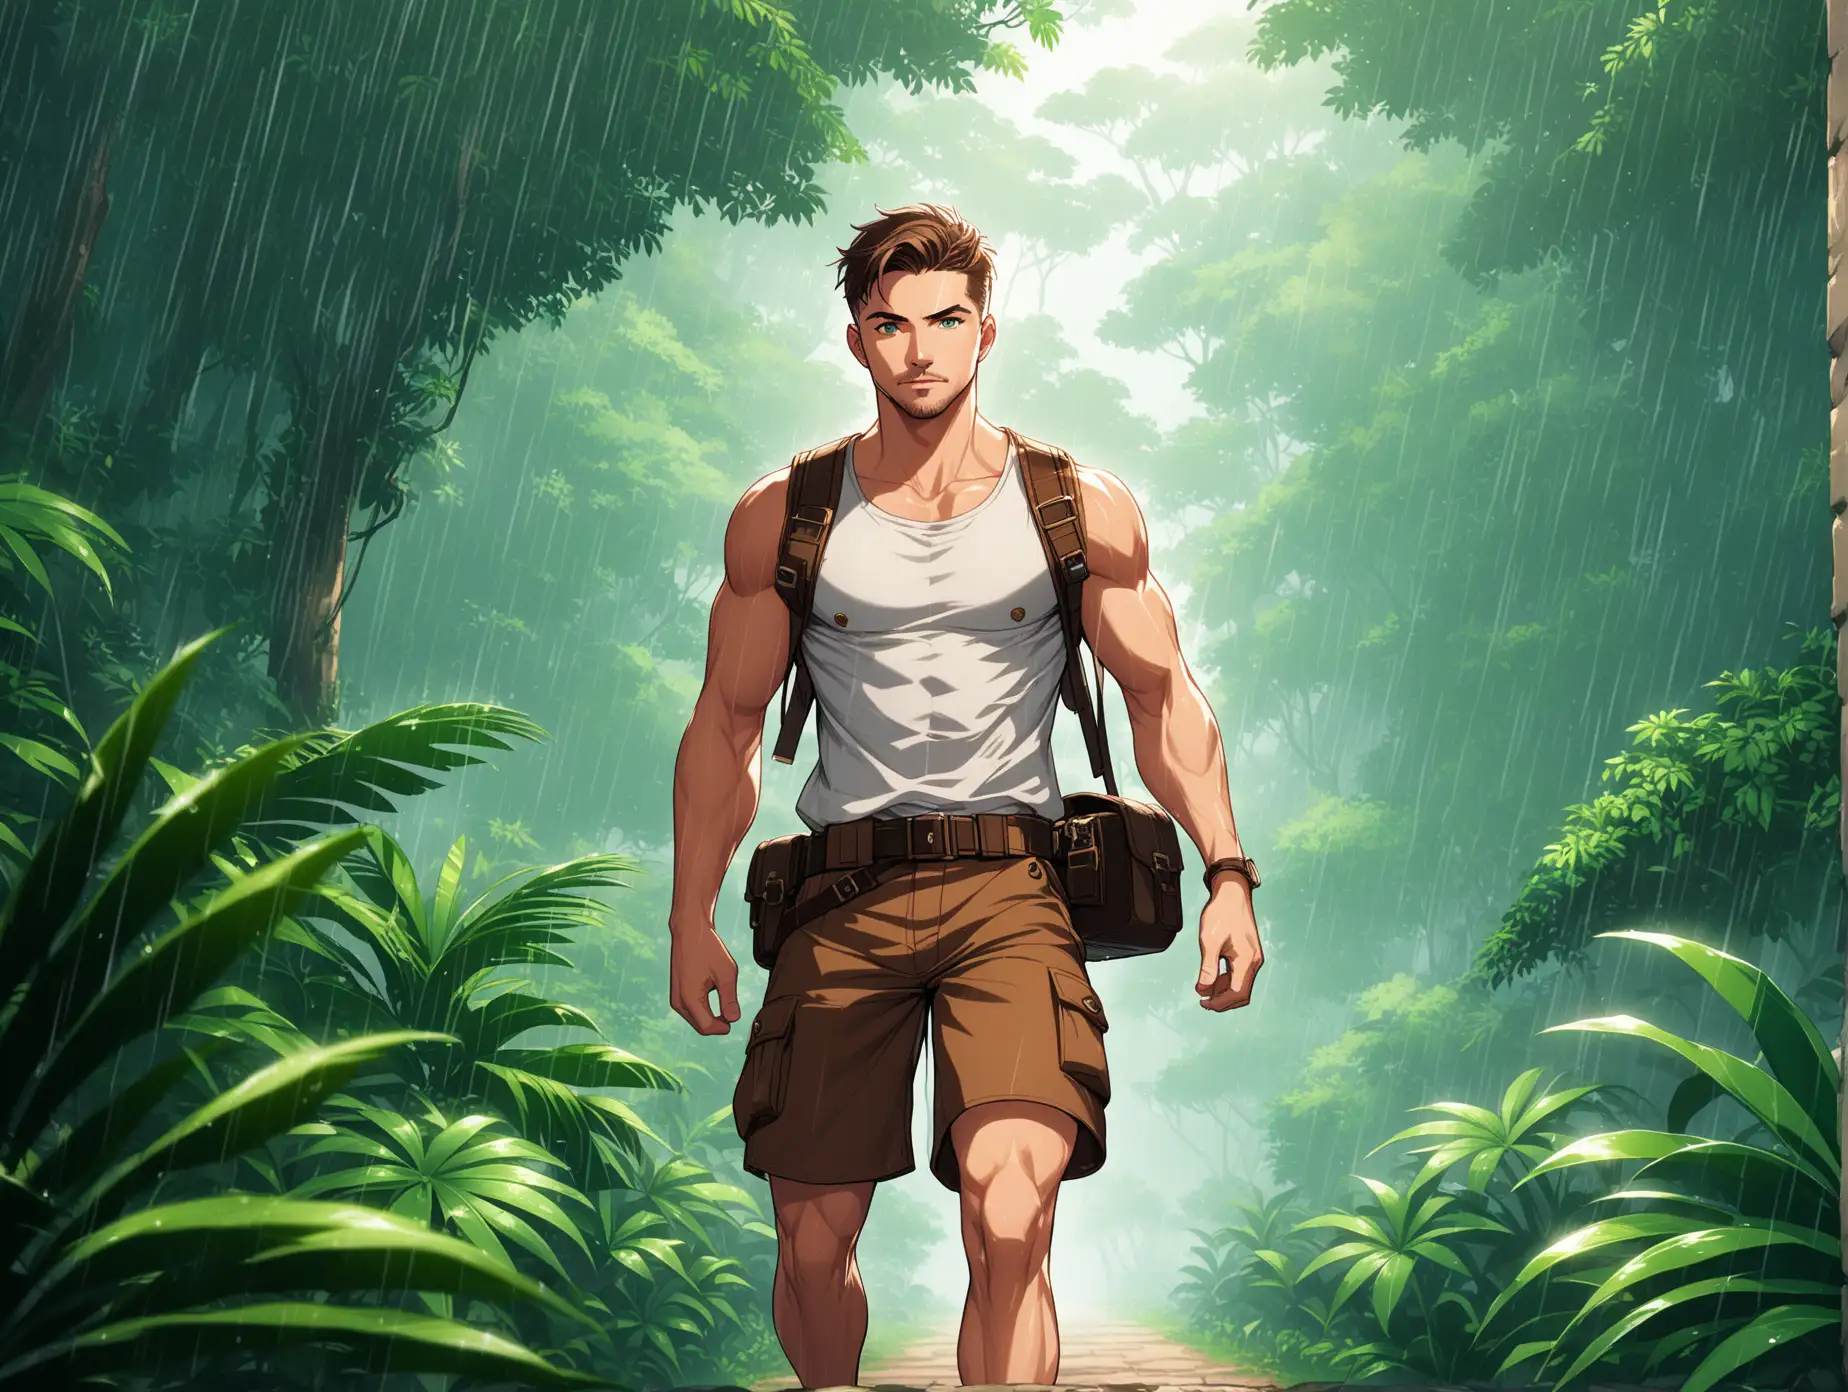 He is 28 years old.
He has a good figure.
His body is muscular.
His face is as handsome as alpha male.
He has a short beard.
He is 189 centimeters tall.
His eyes have warm and brave eyes and emerald-colored eyes.
His hair is Crew Cut style and black.
He's exploring alone in the magnificent jungle.
He's looking around.
He is dressed as an explorer.
Important: He is wearing a white top with his shoulders and arms exposed.
Important: He is wearing brown shorts.
Important: His shoes are brown.
Important: He is wearing a brown bag.
It's raining moistly.
pov looks at his head as a reference.
The background time is from 4:00 PM to 6:00 PM.
QWHD wallpaper (2560×1440 resolution)